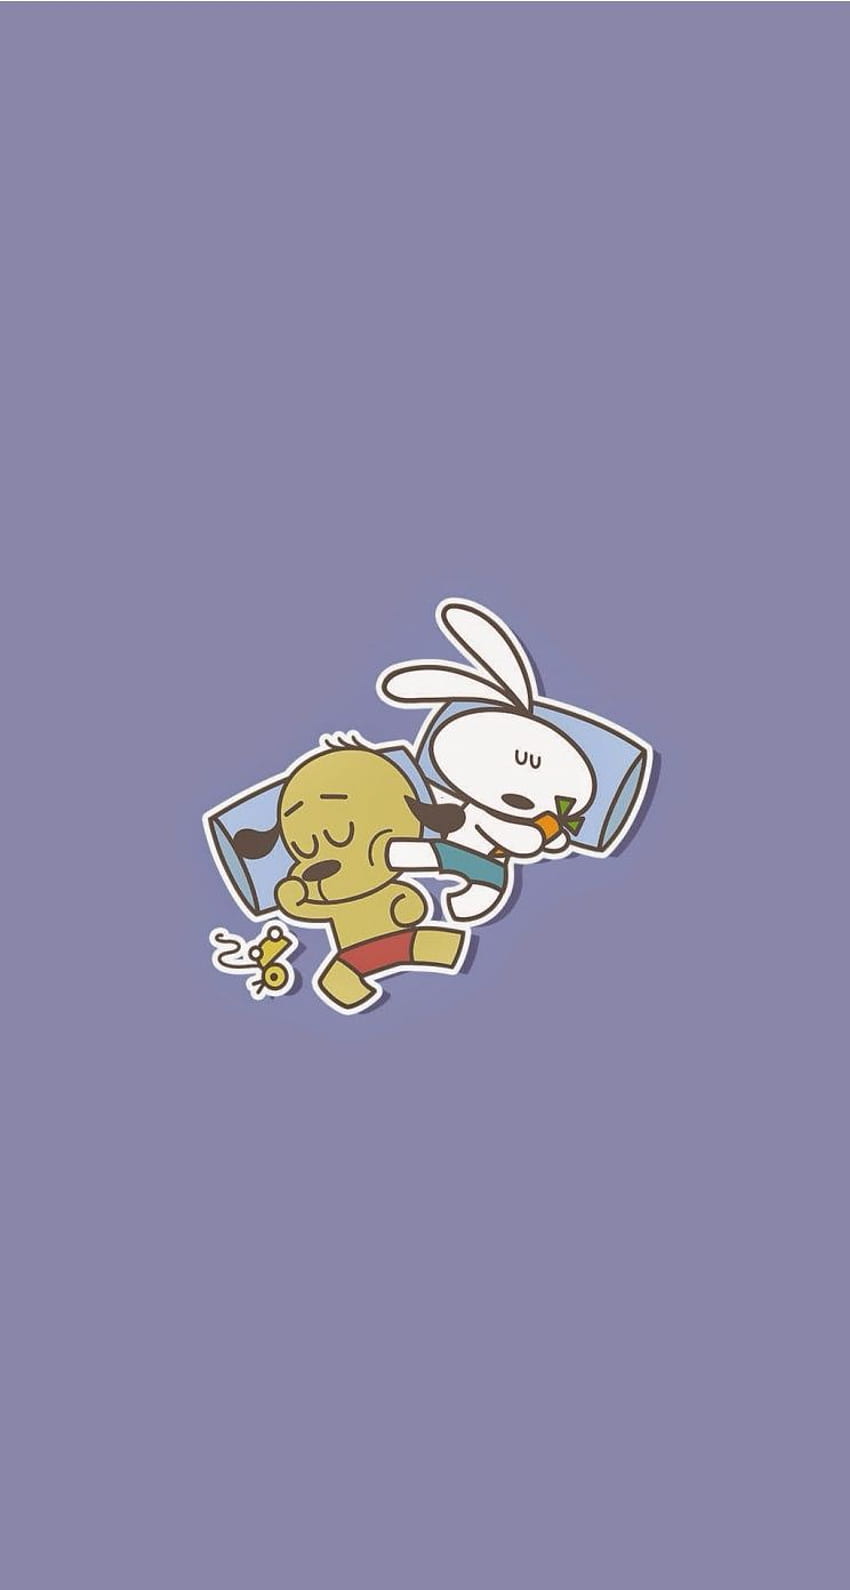 Cute sleeping Bunny and the dog for iPhone. Tap to see, Ihop Resturant HD phone wallpaper